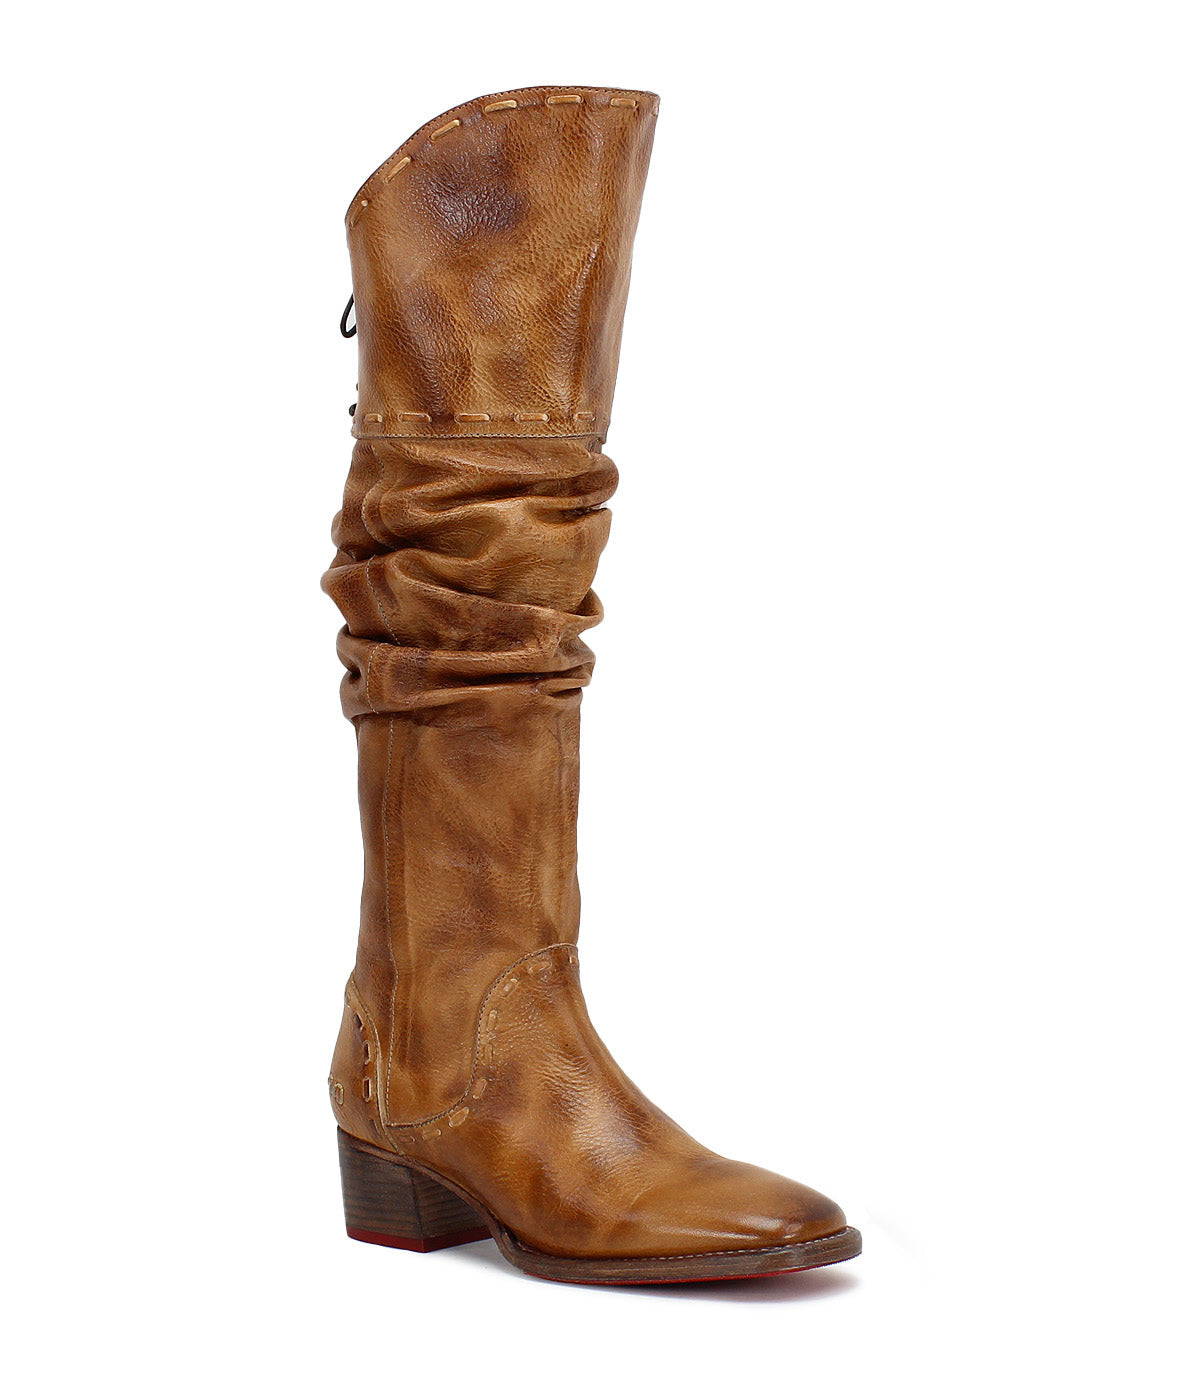 A women's Bed Stu Leilani tan leather over the knee boot.